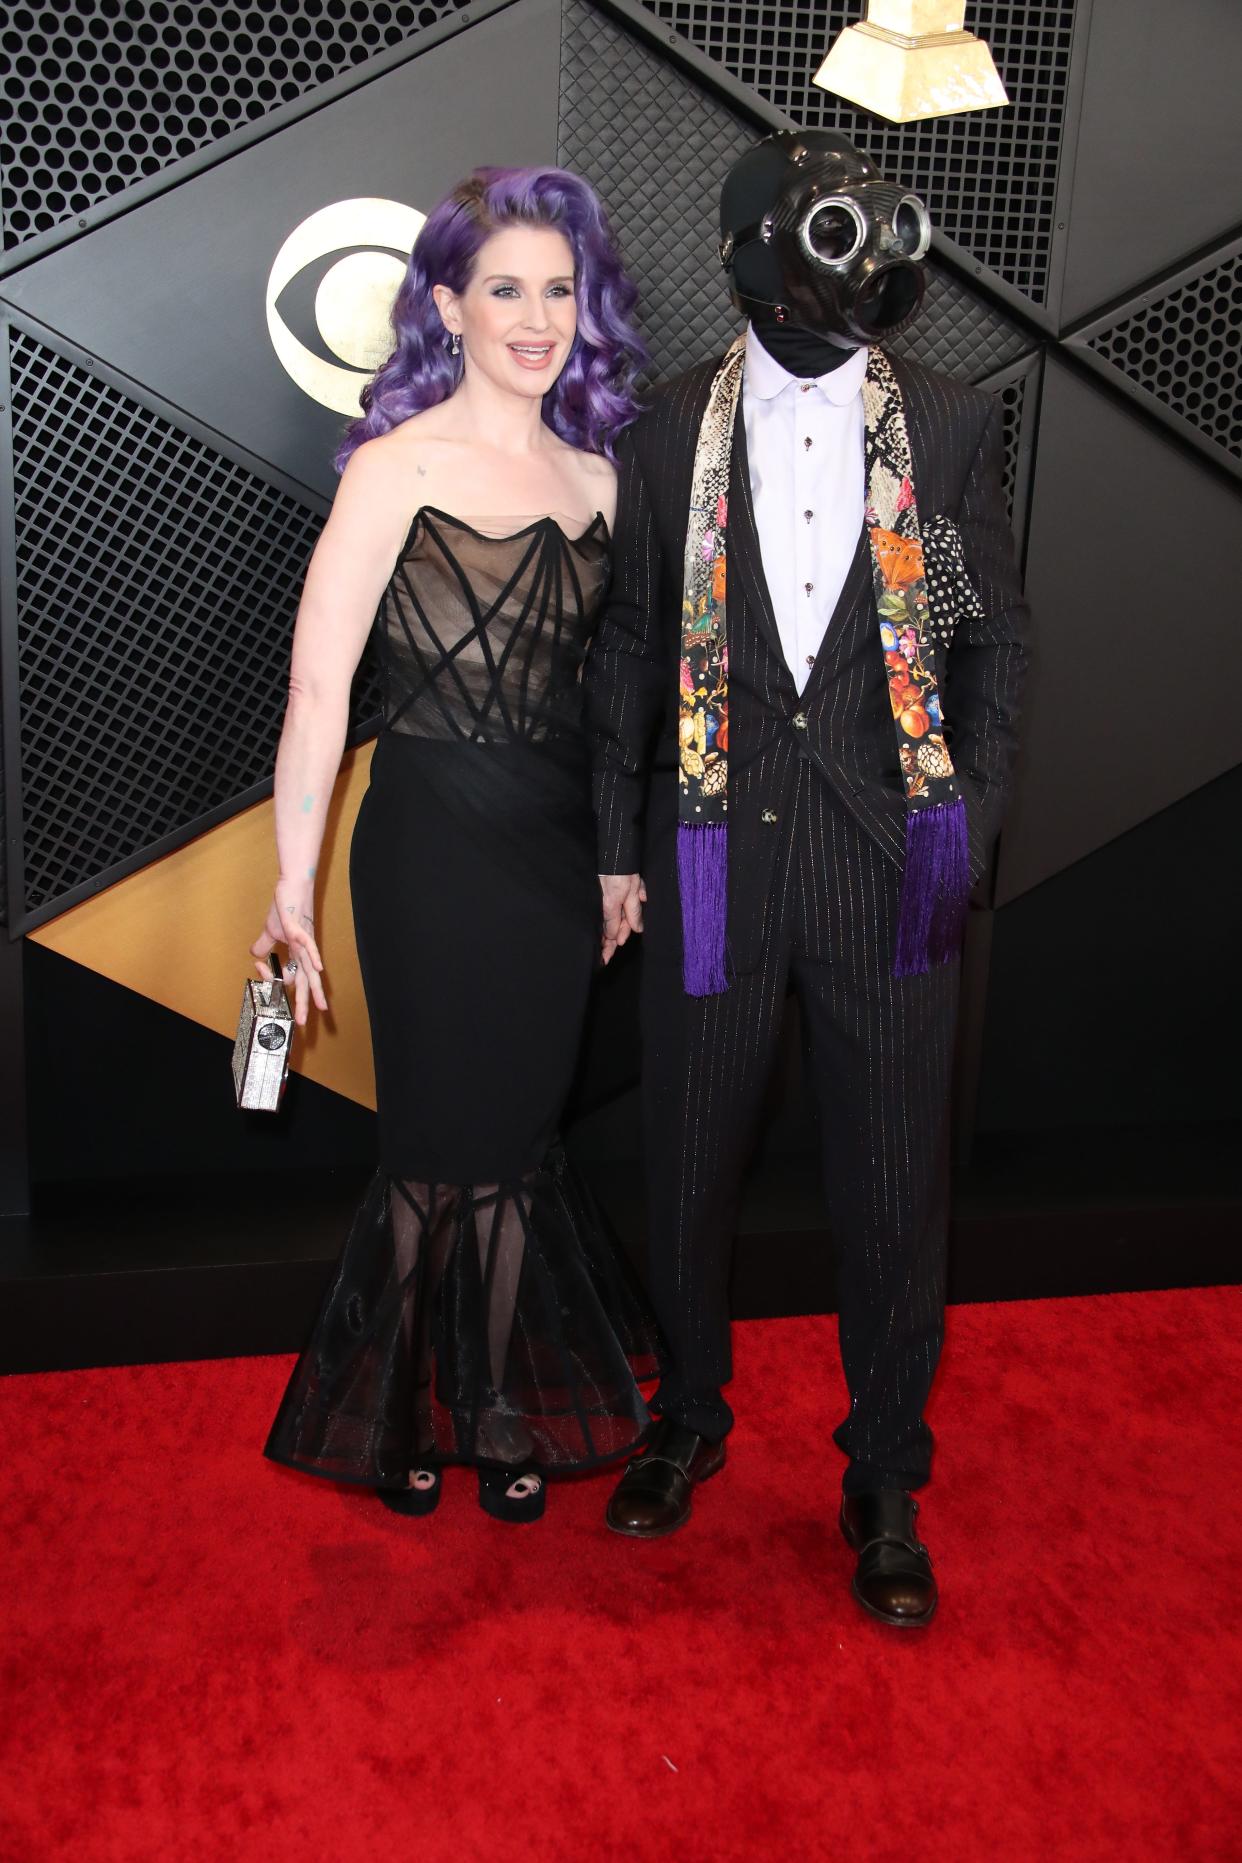 Kelly Osbourne, who has made headlines for controversial comments about Ozempic, pictured with fiancé Sid Wilson of Slipknot.